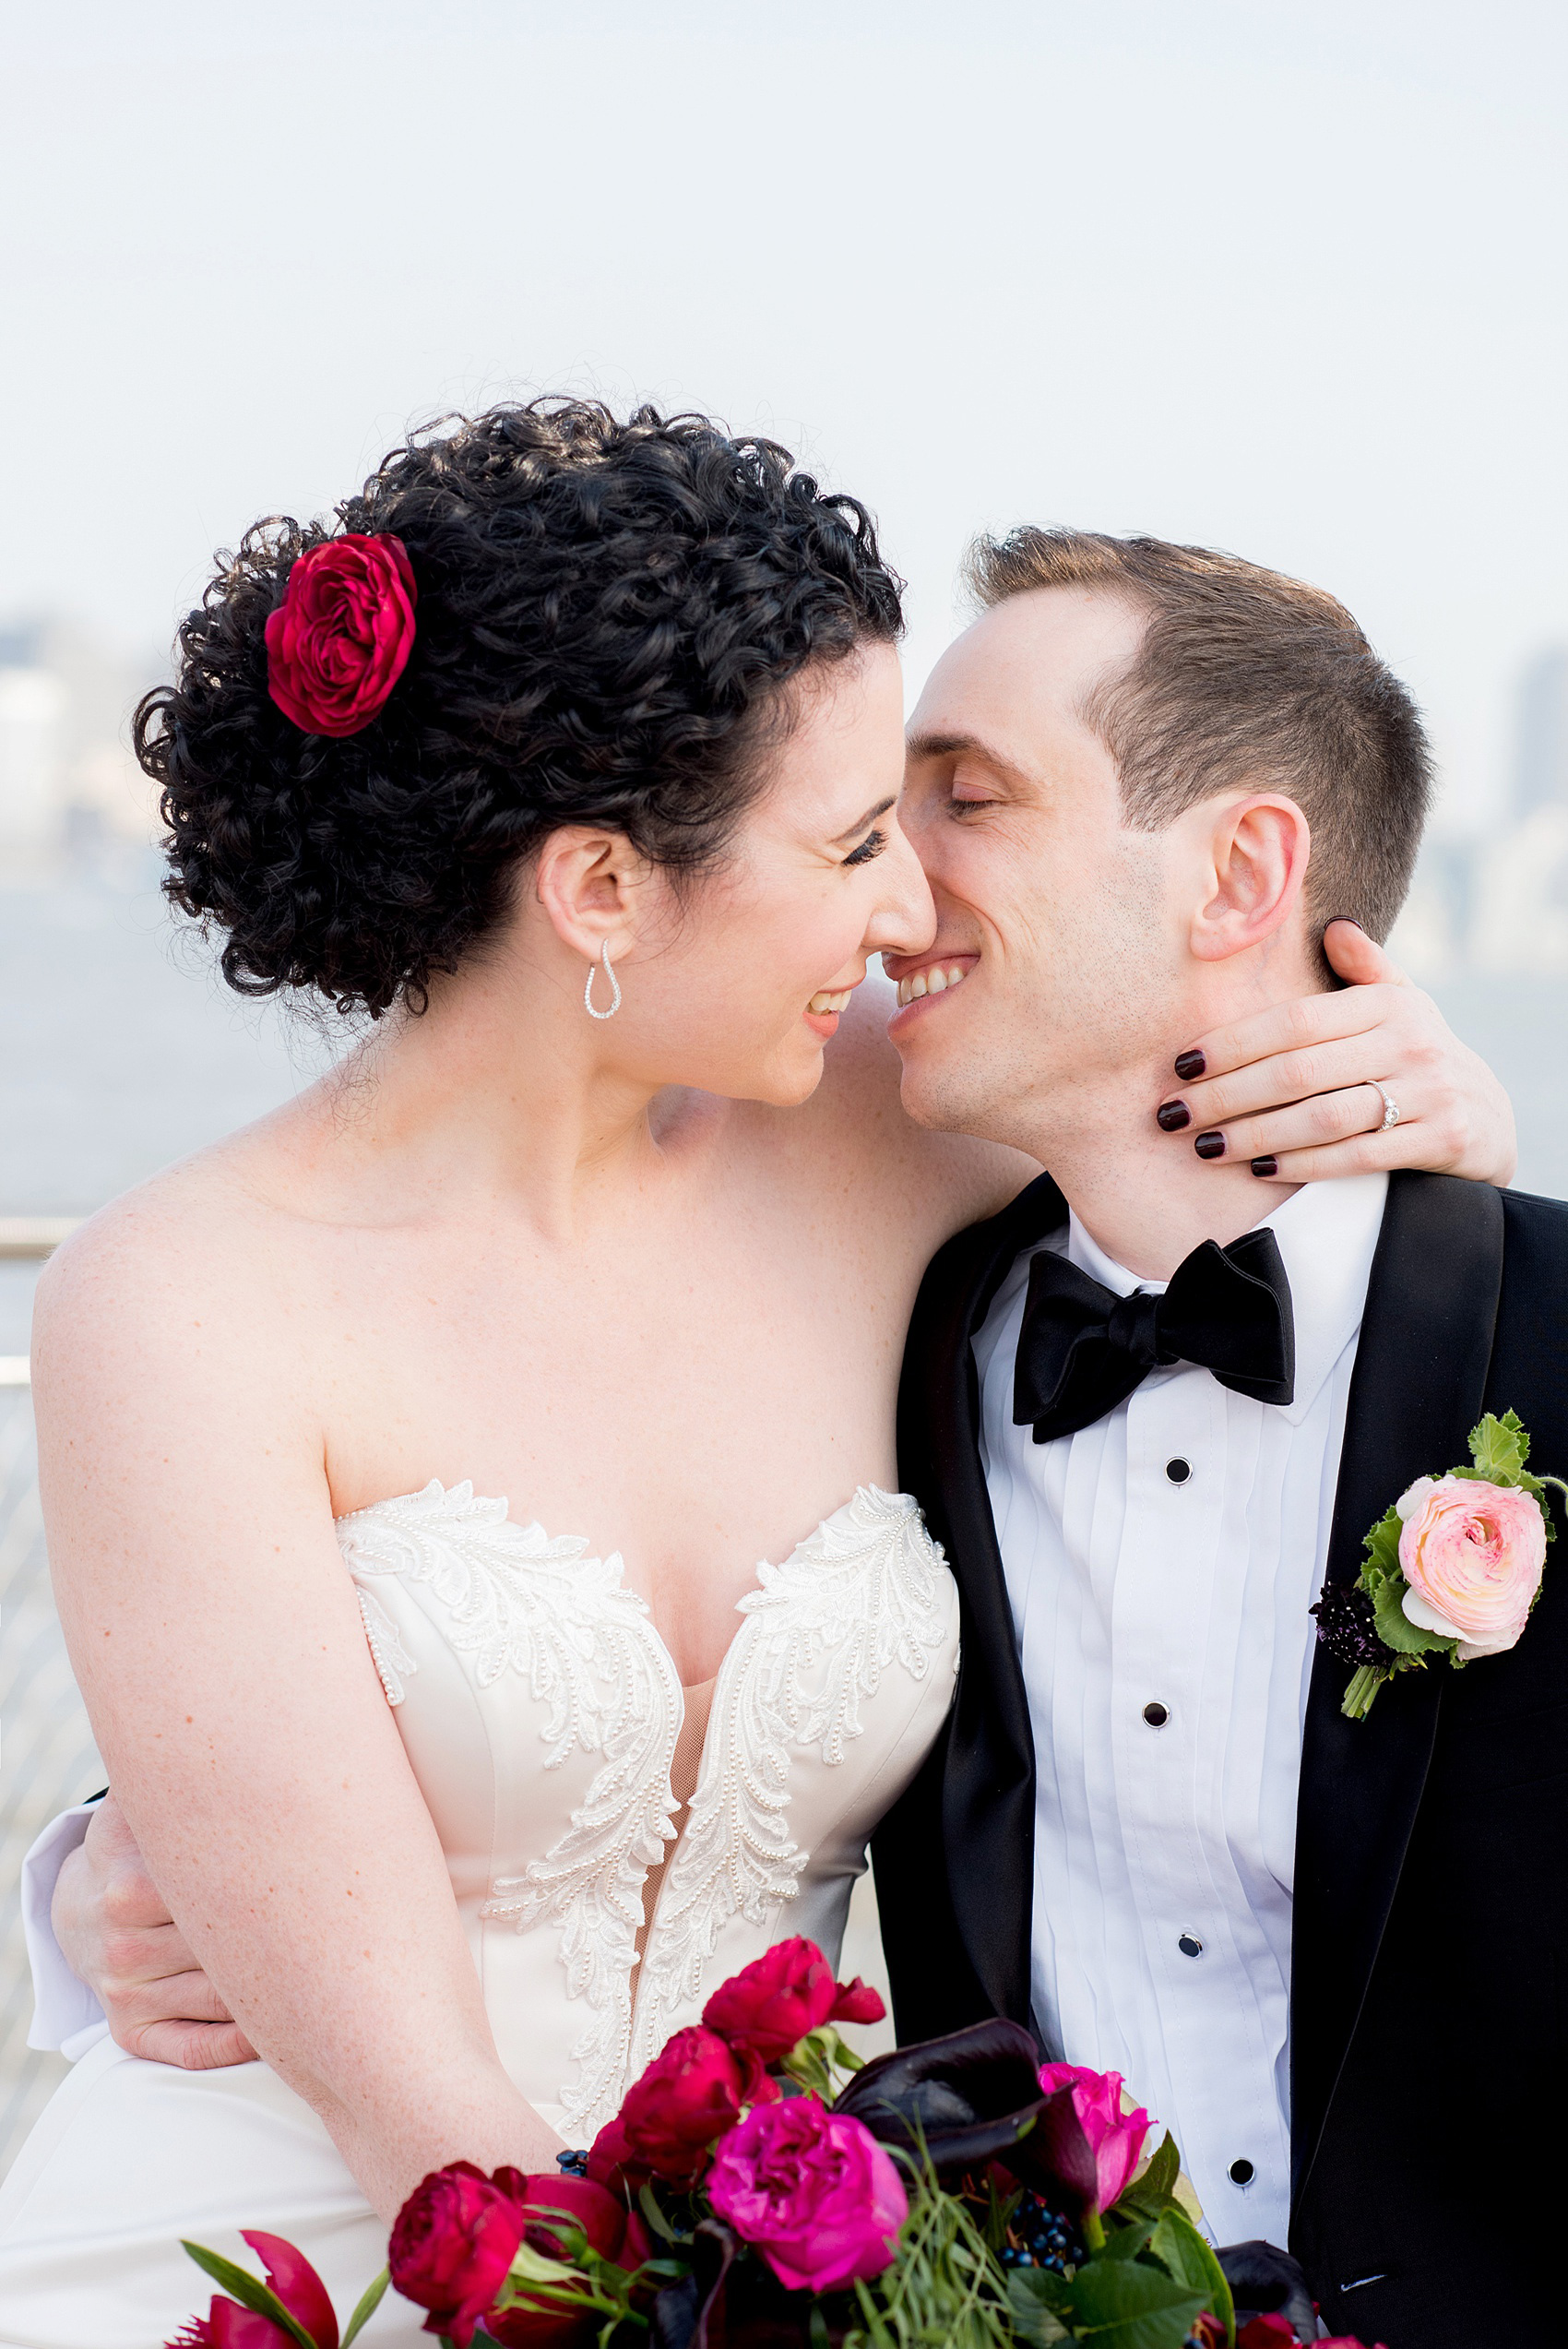 W Hoboken Wedding Photos by Mikkel Paige Photography. Spring wedding overlooking the NYC skyline, with a sexy black, deep red, burgundy and fuchsia color palette. Picture of the bride and groom laughing and kissing. #HobokenWedding #mikkelpaige #springwedding #romanticwedding #NewJerseyWeddingPhotos